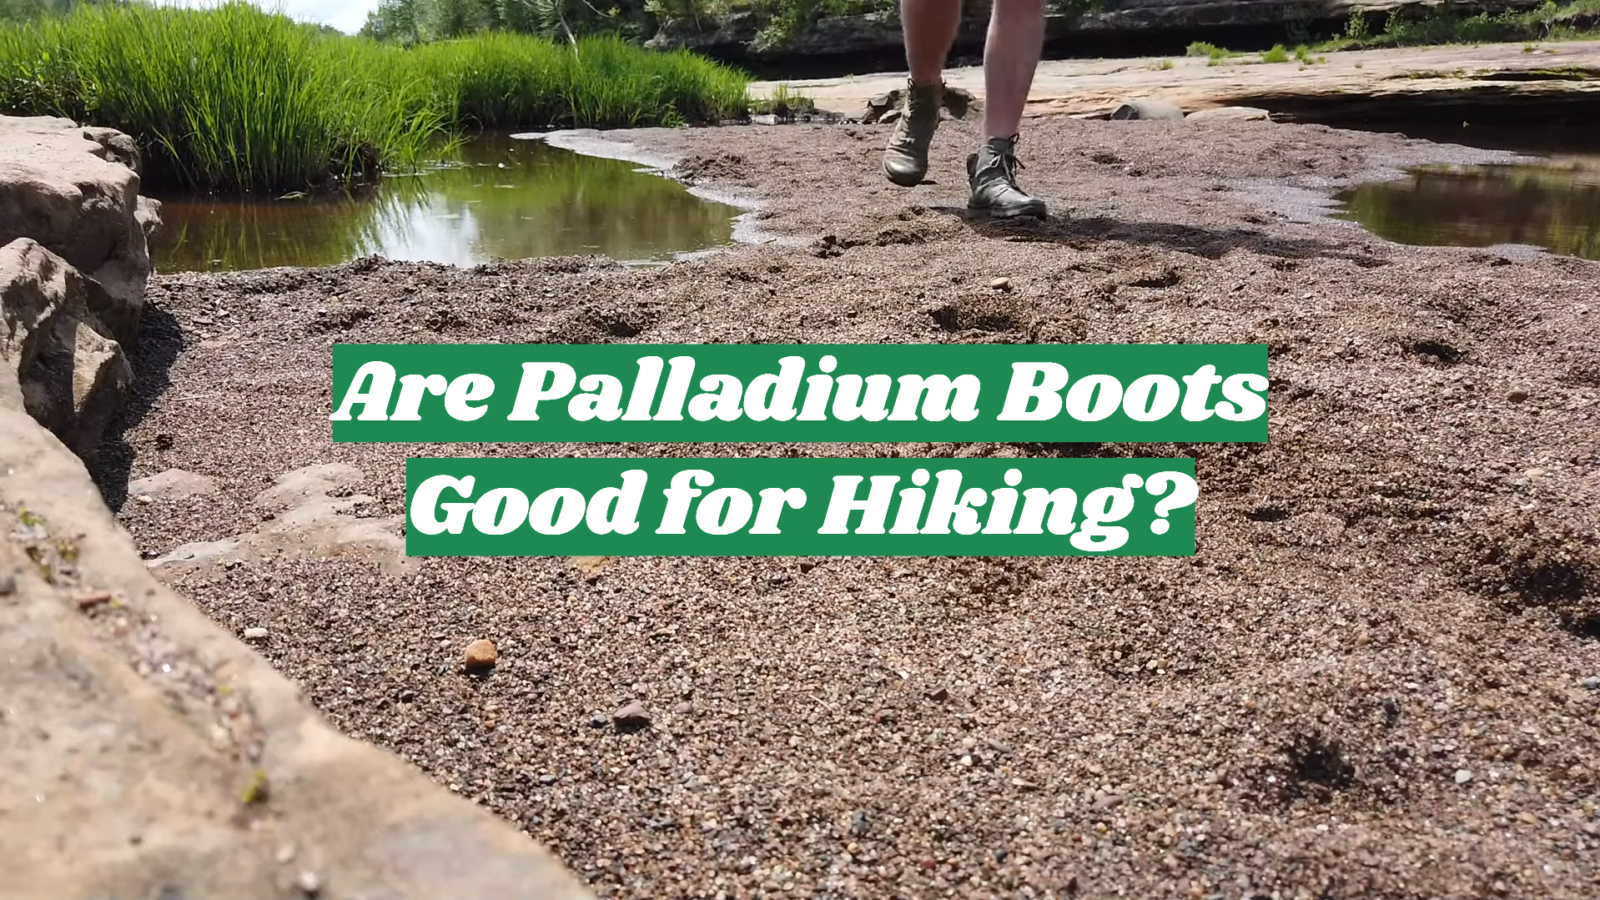 Are Palladium Boots Good for Hiking?